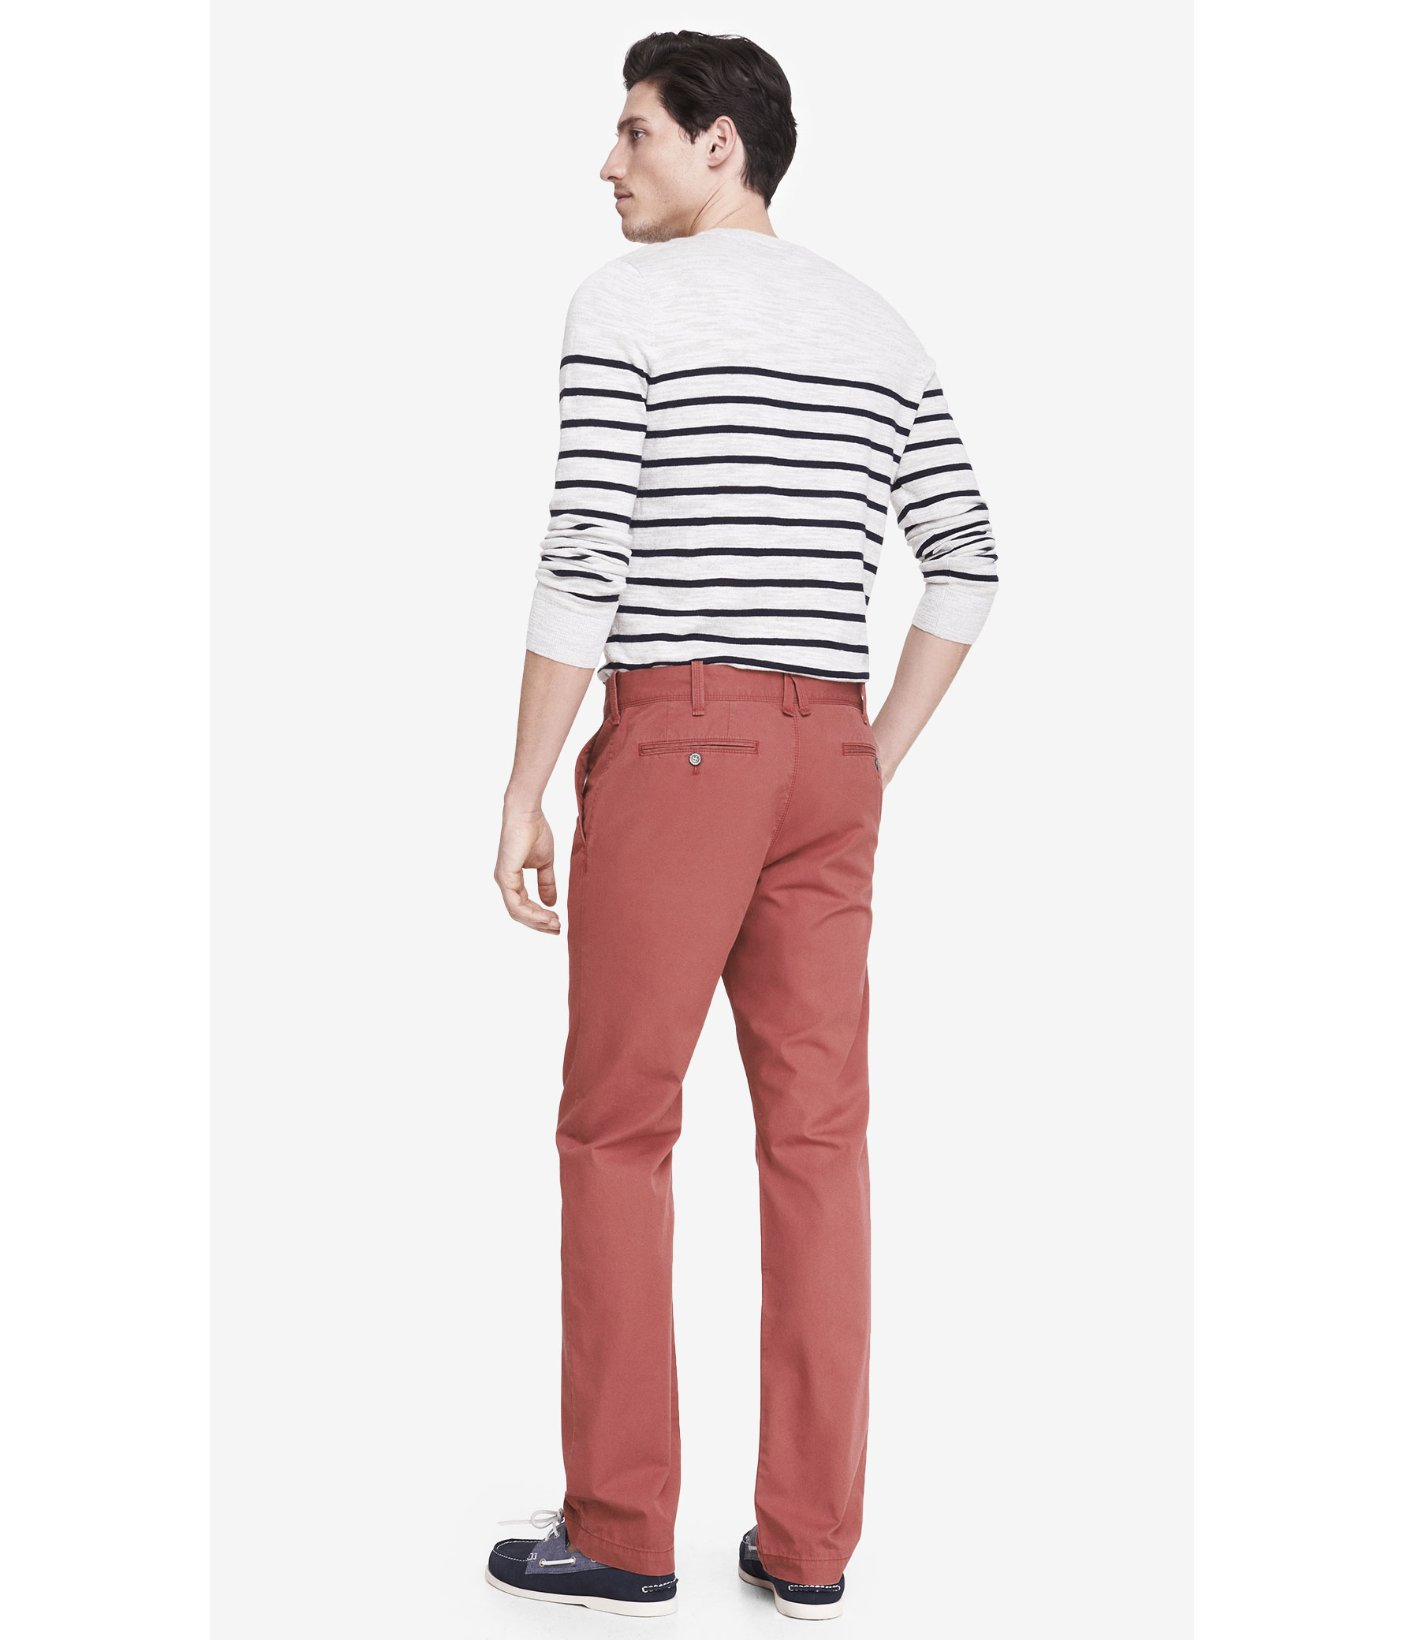 Lyst - Express Finn Slim Chino Pant in Pink for Men